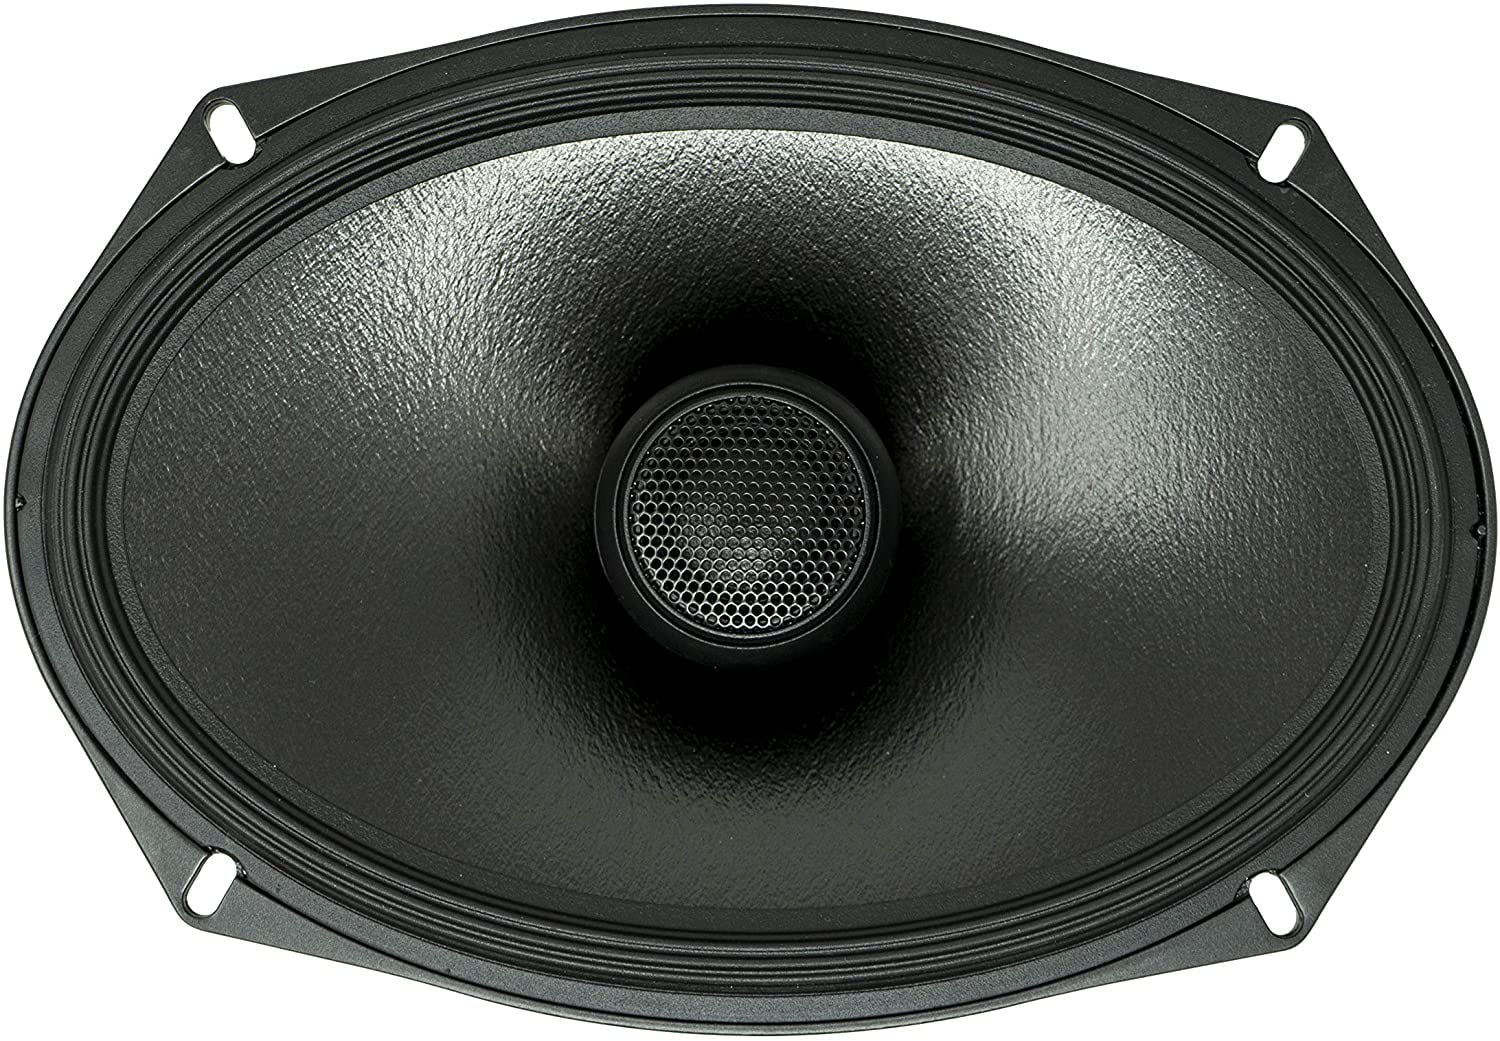 Alpine R-Series R-S69 6x9 2 Way 300W Coaxial Speakers Powerful Bass High Clarity 